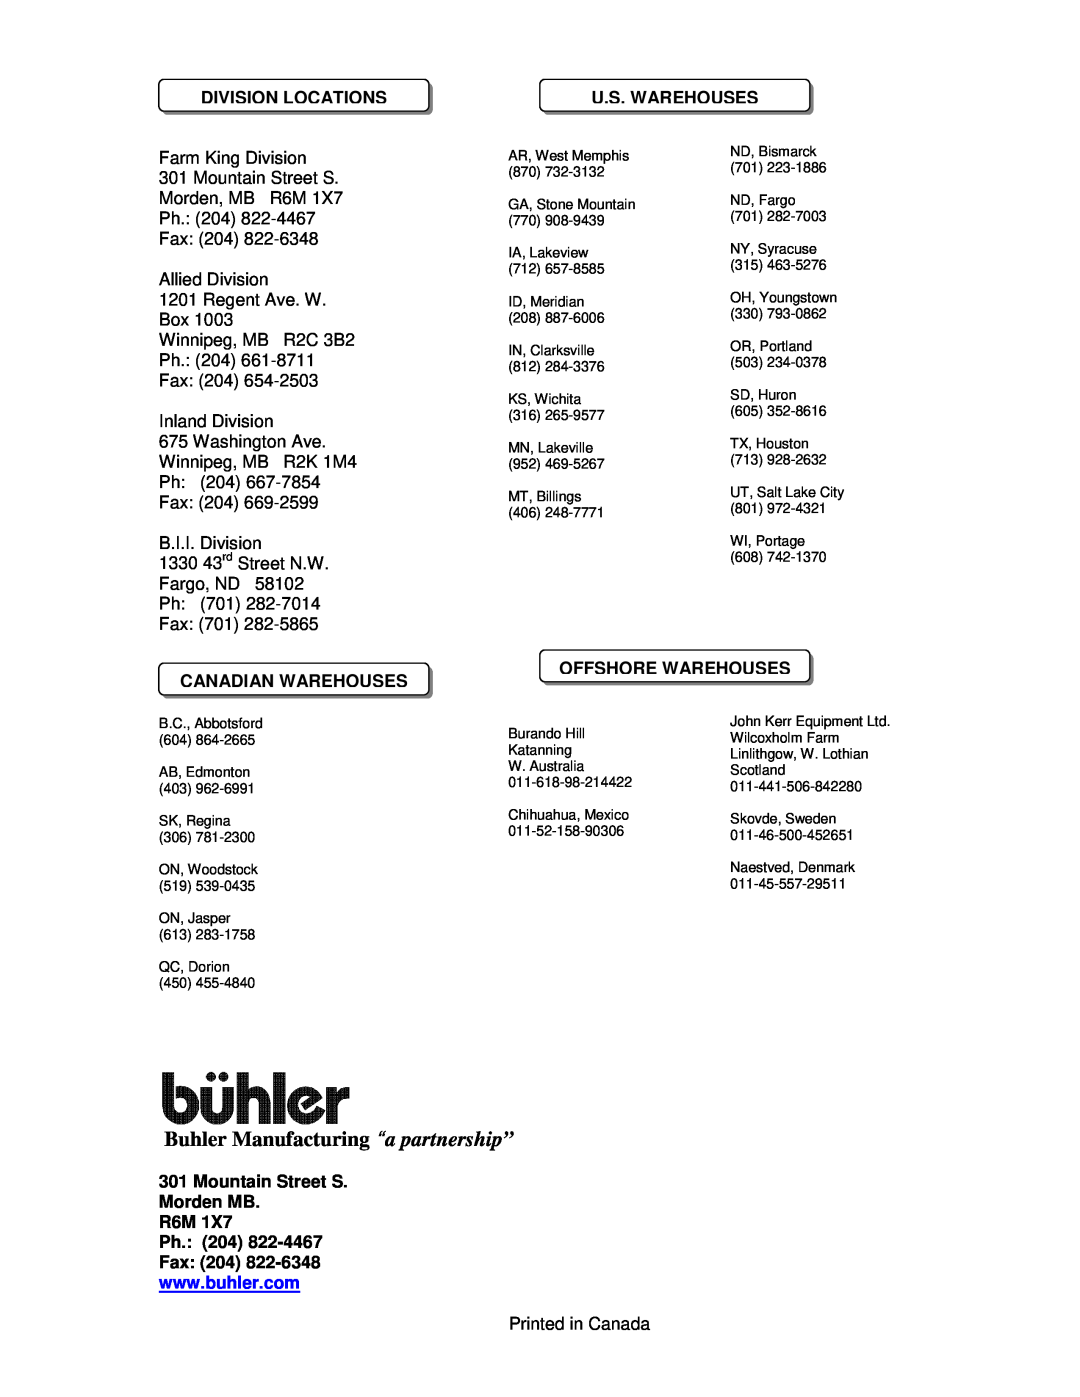 Buhler FK315 Buhler Manufacturing “a partnership”, Division Locations, Ph. 204 Fax 204 Inland Division 675 Washington Ave 